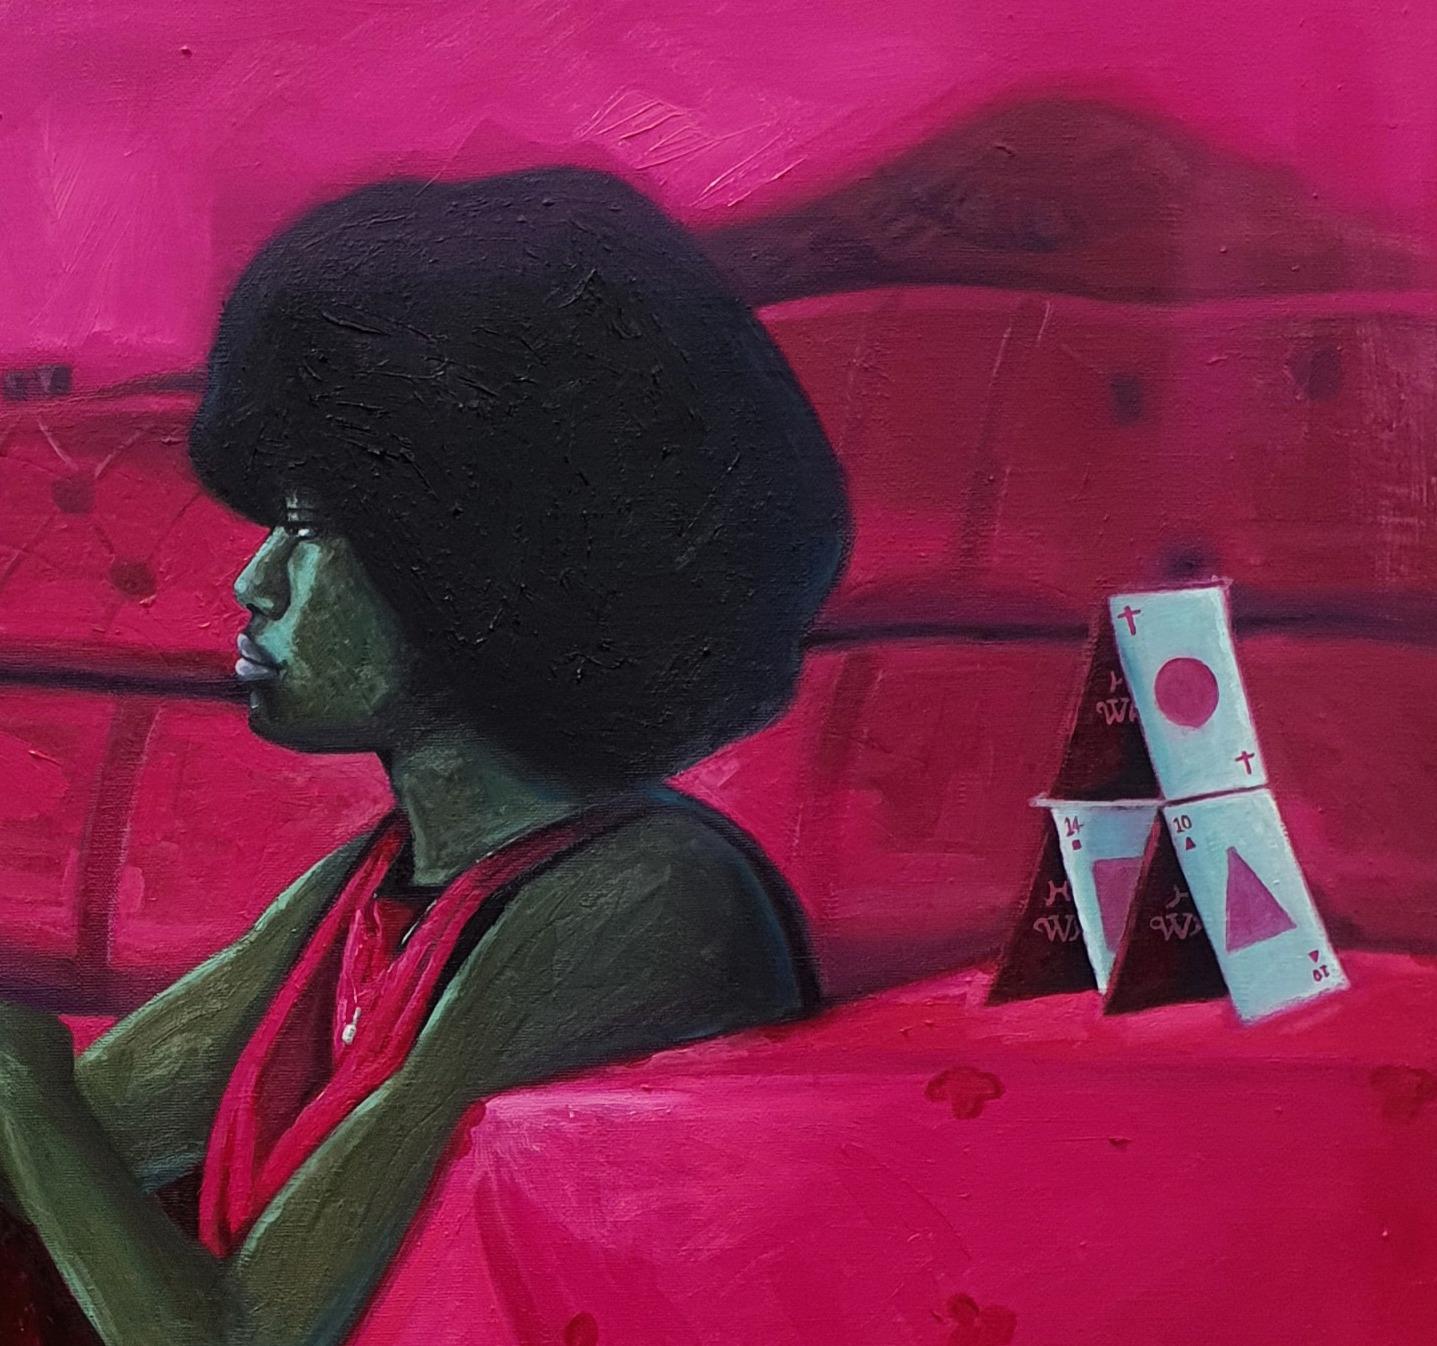 Bleasure 4 (House of Cards) - Contemporary Painting by Ajegbomogun Damilola